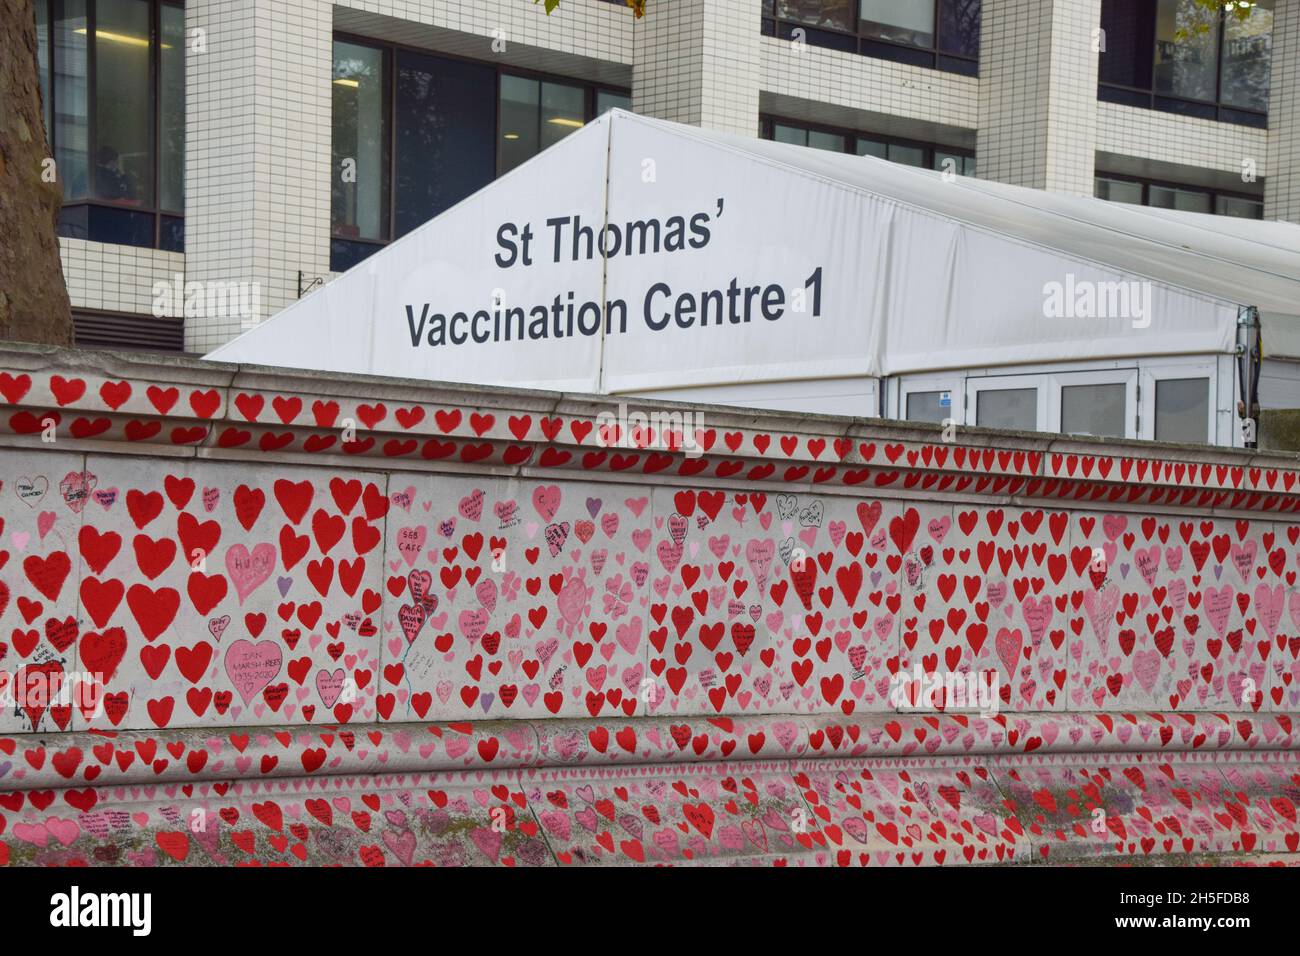 London, UK. 9th November 2021. The National Covid Memorial Wall and vaccination centre outside St Thomas' Hospital. Over 150,000 red hearts have been painted by volunteers and members of the public, one for each life lost to Covid in the UK to date. Credit: Vuk Valcic / Alamy Live News Stock Photo